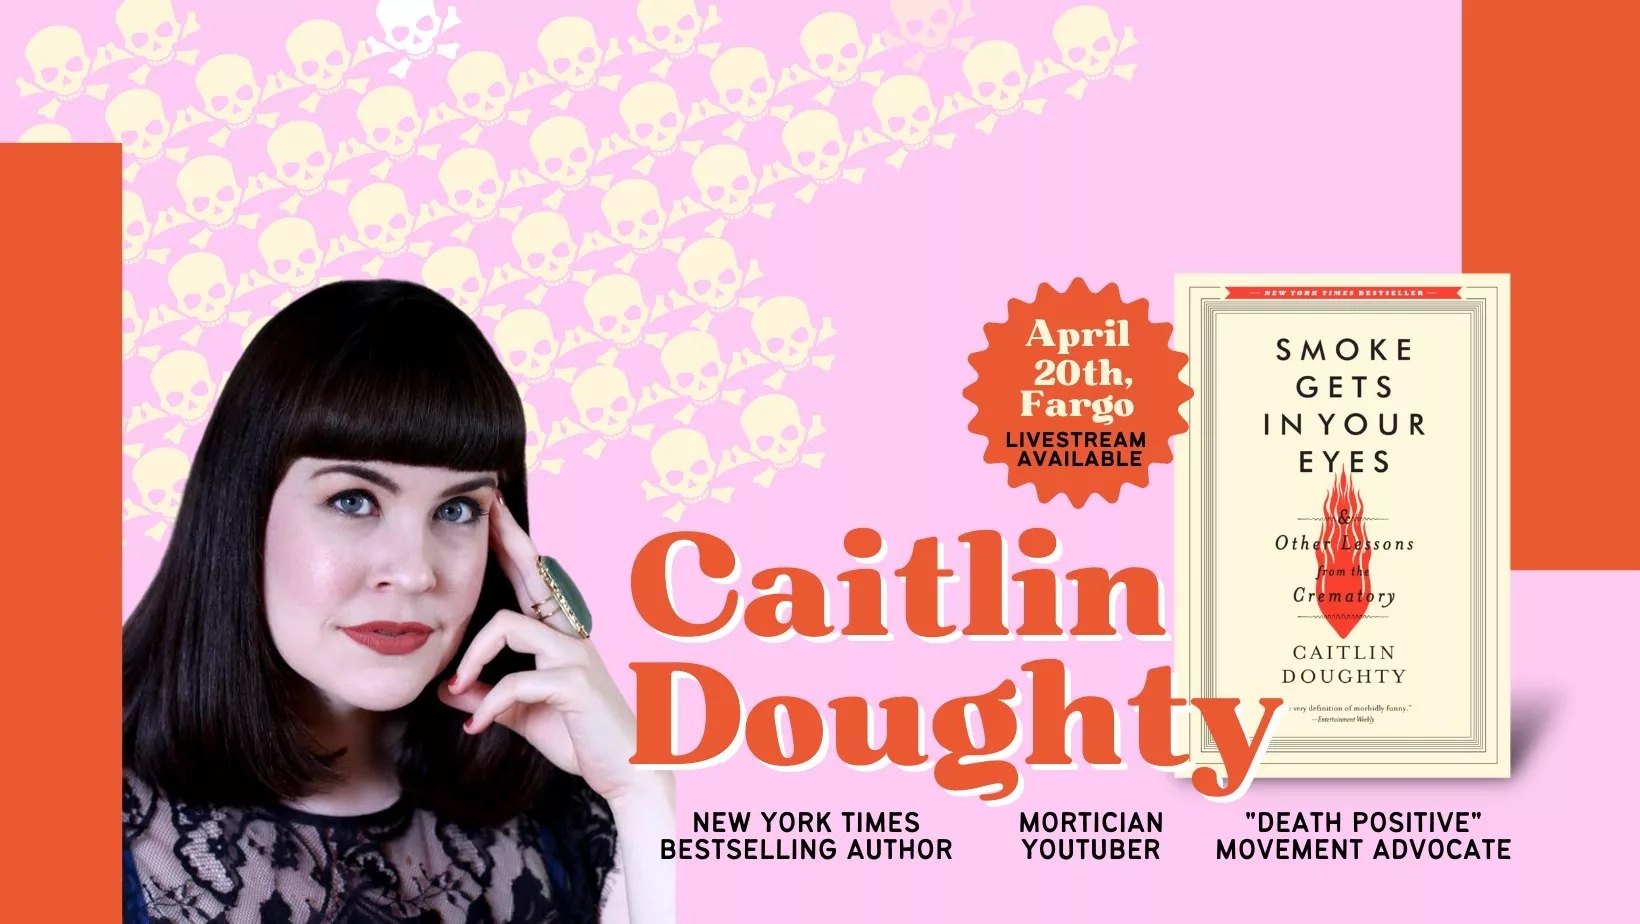 Humanities ND presents Caitlin Doughty, Mortician and New York Times Bestselling Author